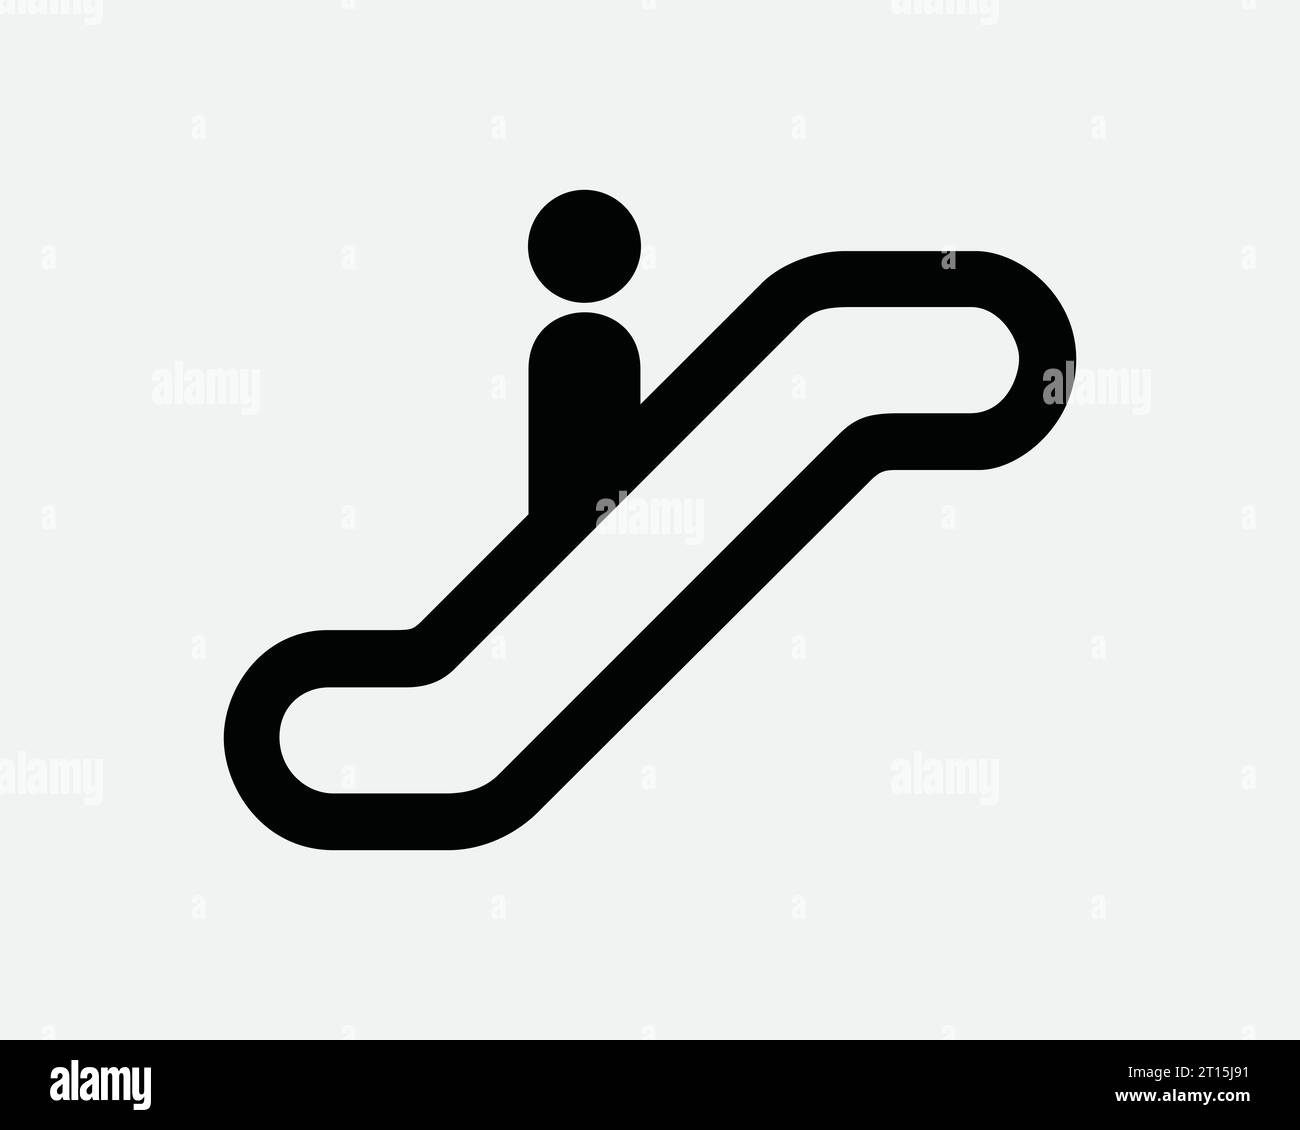 Escalator Icon Moving Stair Stairs Up Down Floor Step Information Top Bottom Transport Travel Black White Line Outline Shape Sign Symbol EPS Vector Stock Vector